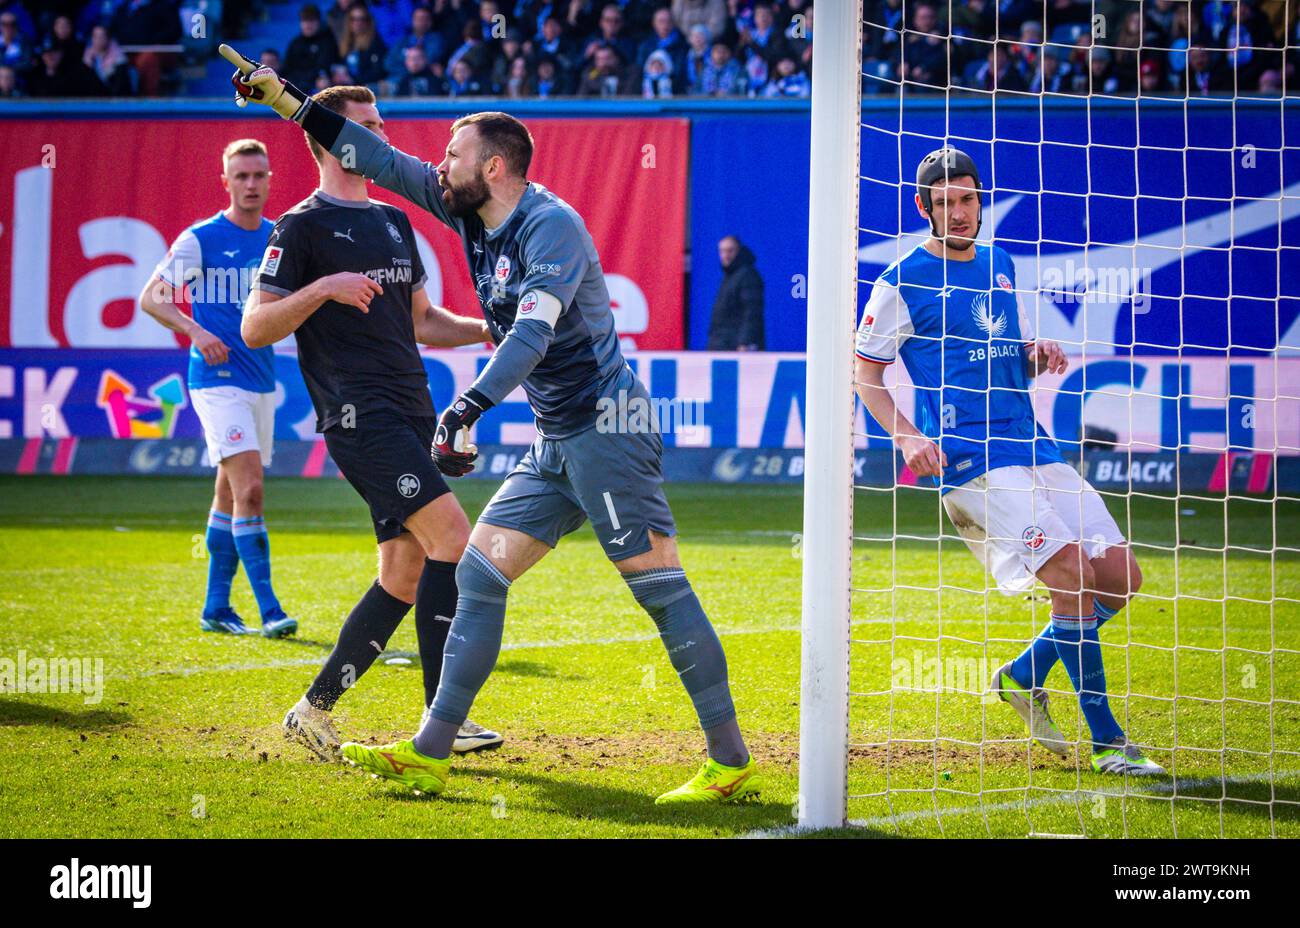 Rostock, Germany. 16th Mar, 2024. Soccer: Bundesliga 2, Hansa Rostock - SpVgg Greuther Fürth, Matchday 26, Ostseestadion. Rostock goalkeeper Markus Kolke. Rostock wins 1 : 0 against Greuther Fürth. Credit: Jens Büttner/dpa - IMPORTANT NOTE: In accordance with the regulations of the DFL German Football League and the DFB German Football Association, it is prohibited to utilize or have utilized photographs taken in the stadium and/or of the match in the form of sequential images and/or video-like photo series./dpa/Alamy Live News Stock Photo